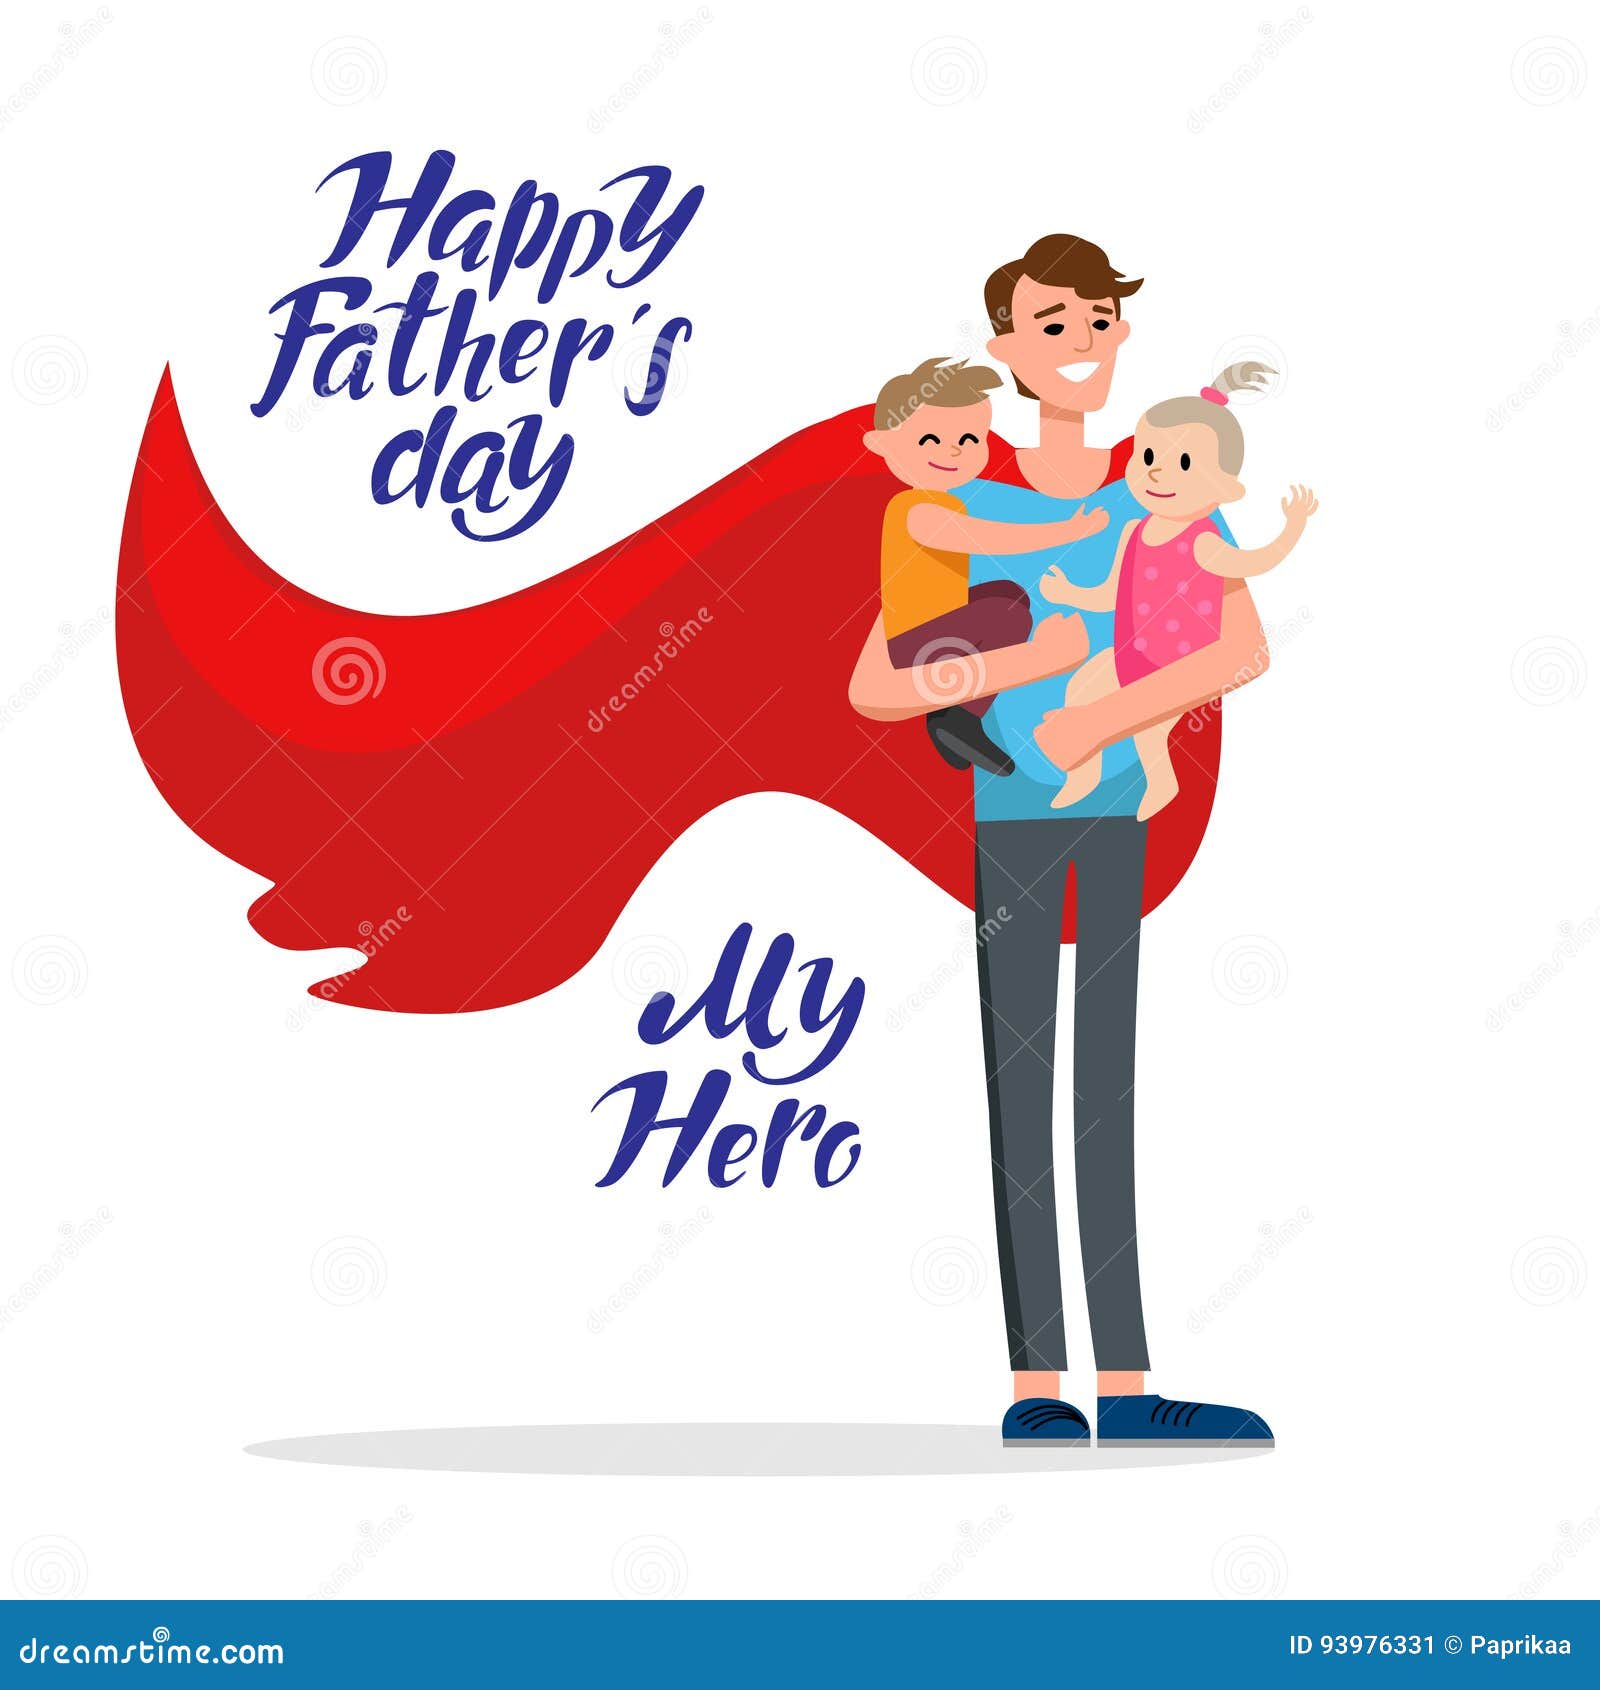 Happy fathers day stock vector. Illustration of cute - 93976331